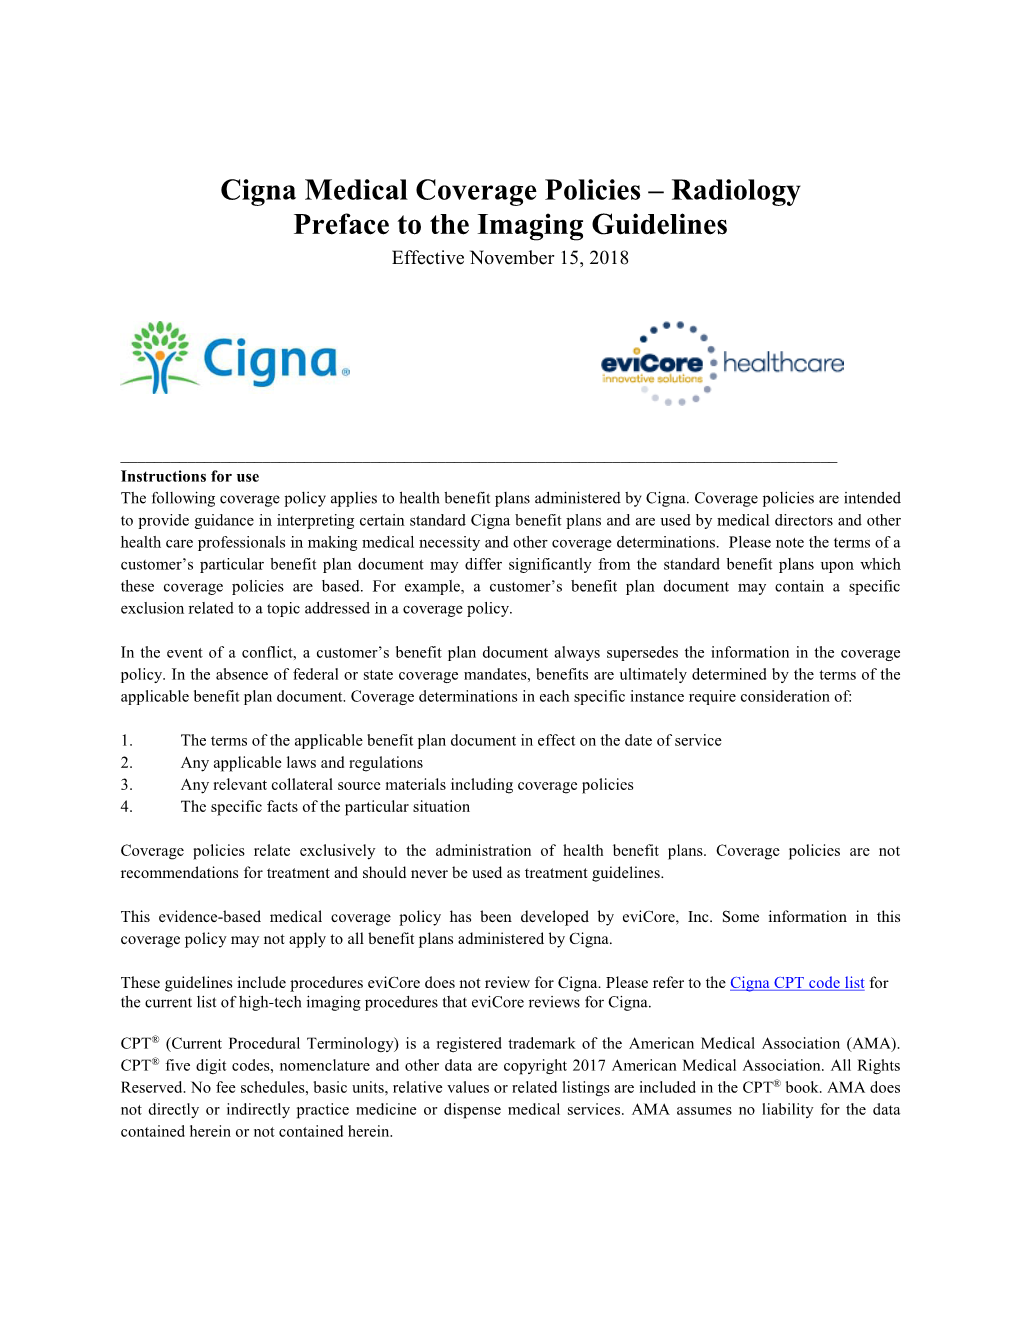 Cigna Medical Coverage Policies – Radiology Preface to the Imaging Guidelines Effective November 15, 2018